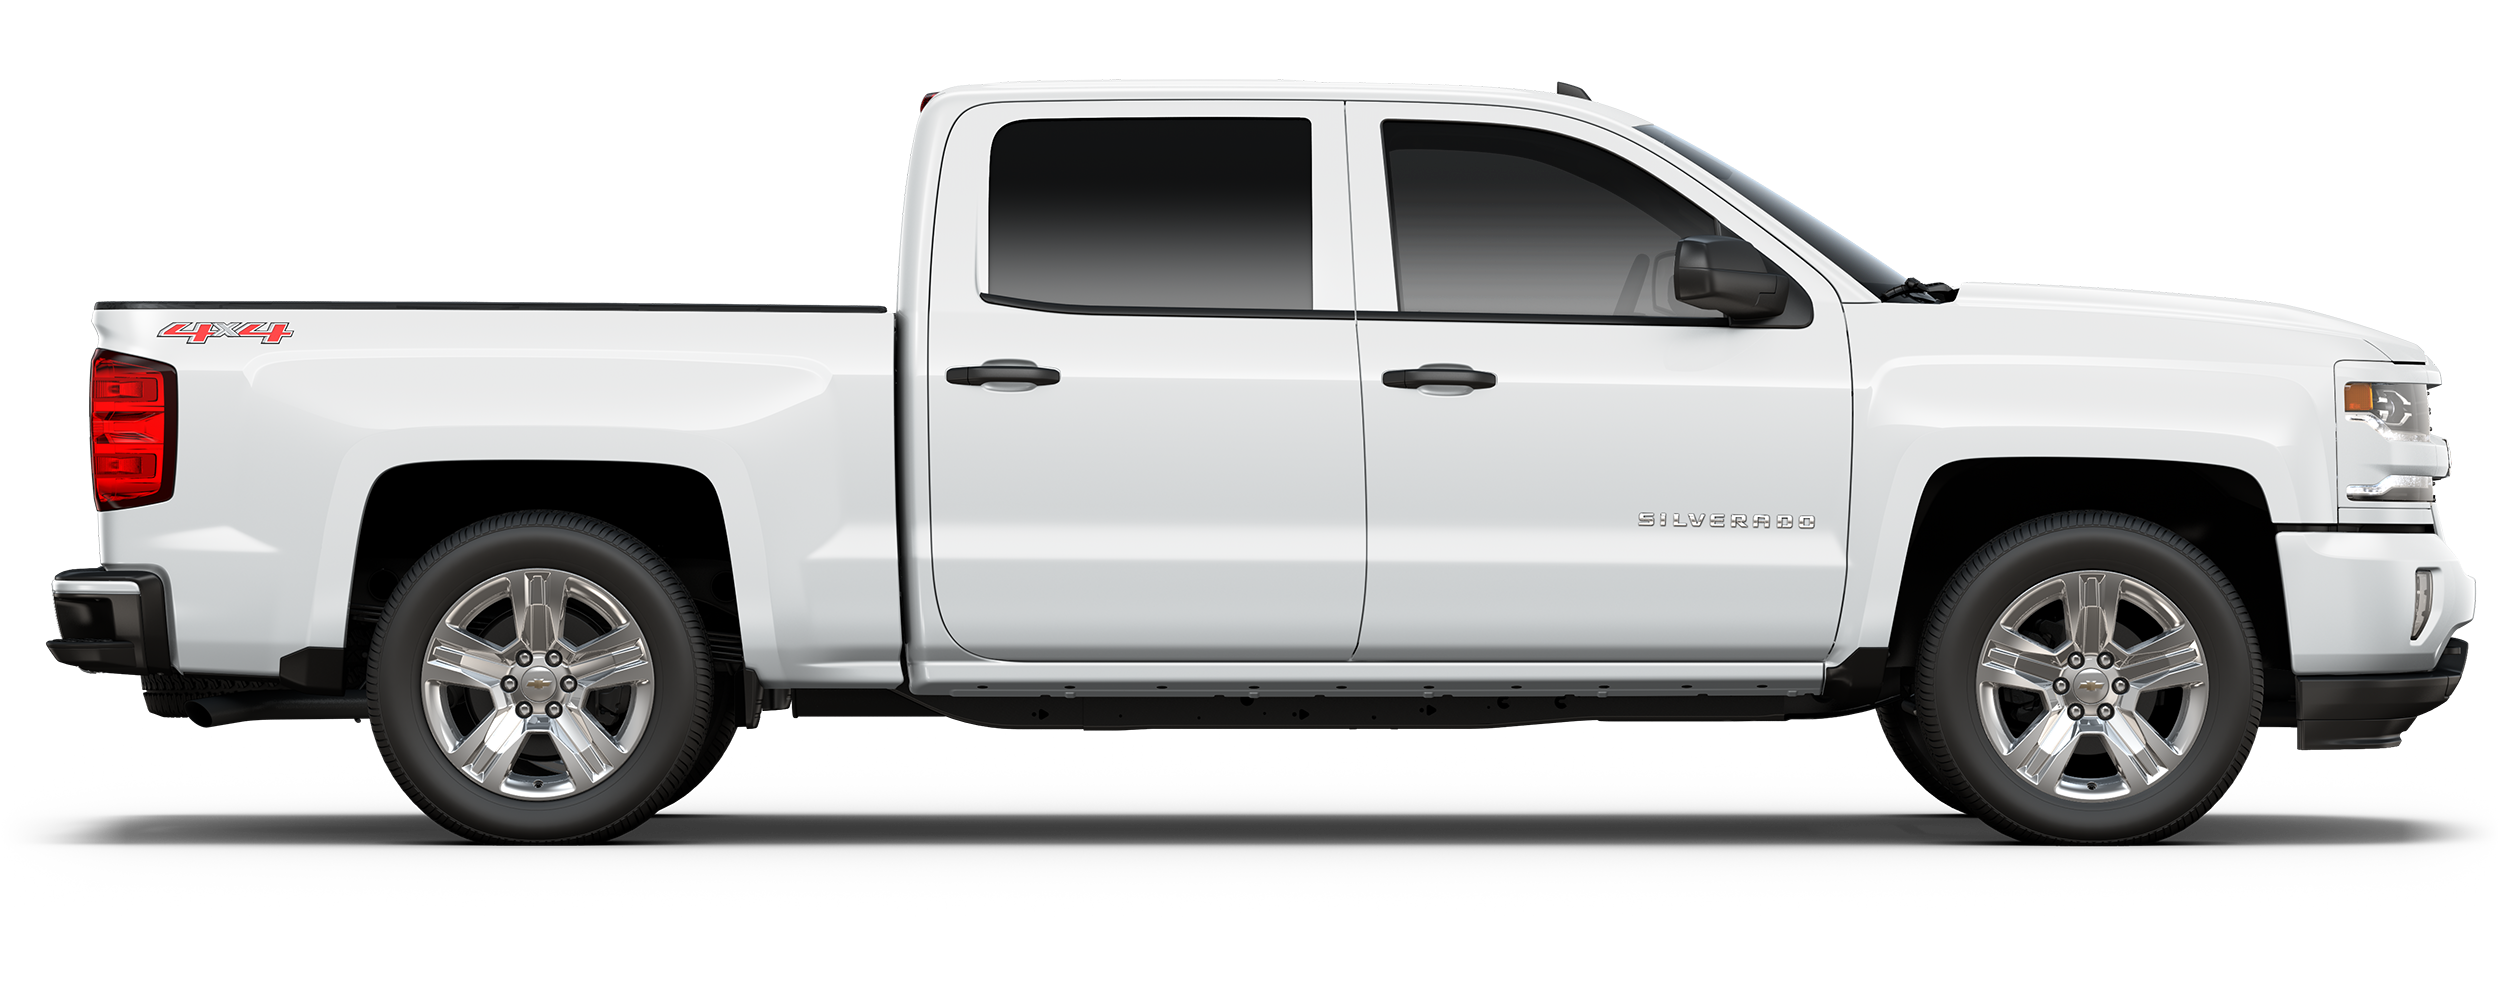 Pickup Truck PNG Images HD